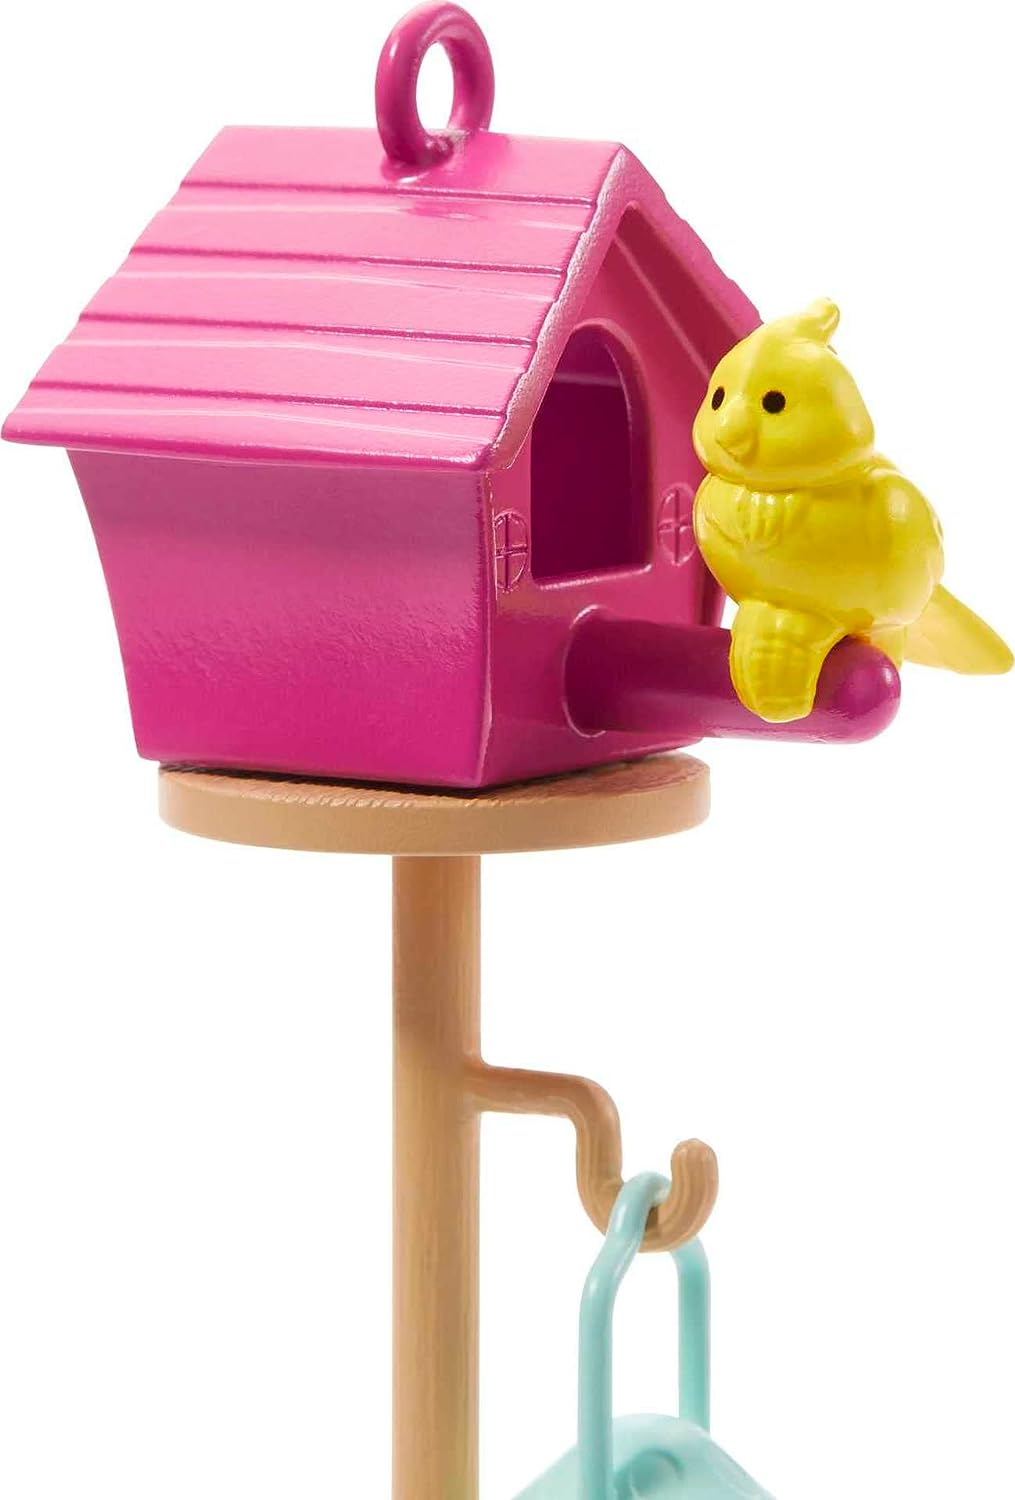 Barbie Furniture and Accessory Pack, Barbie Doll House Décor, Backyard Patio, Bonfire, Birdfeeder and Birdhouse, Kids Toys and Gifts